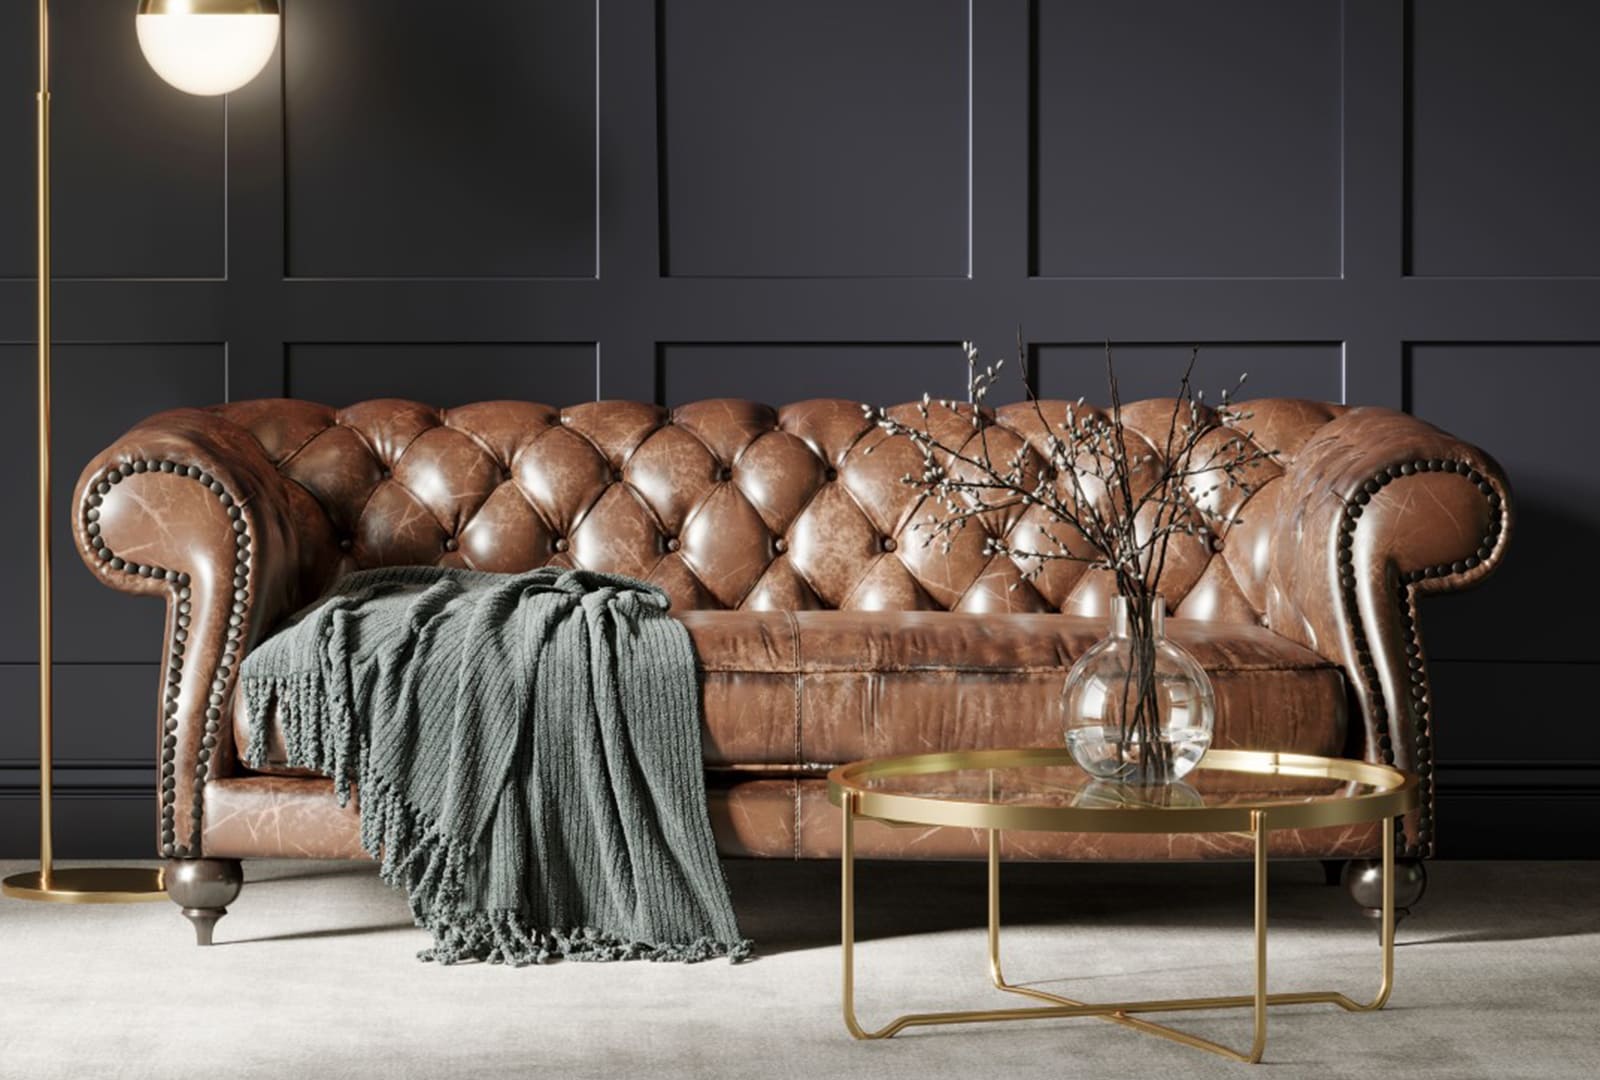 How to keep your leather sofa warm in winter